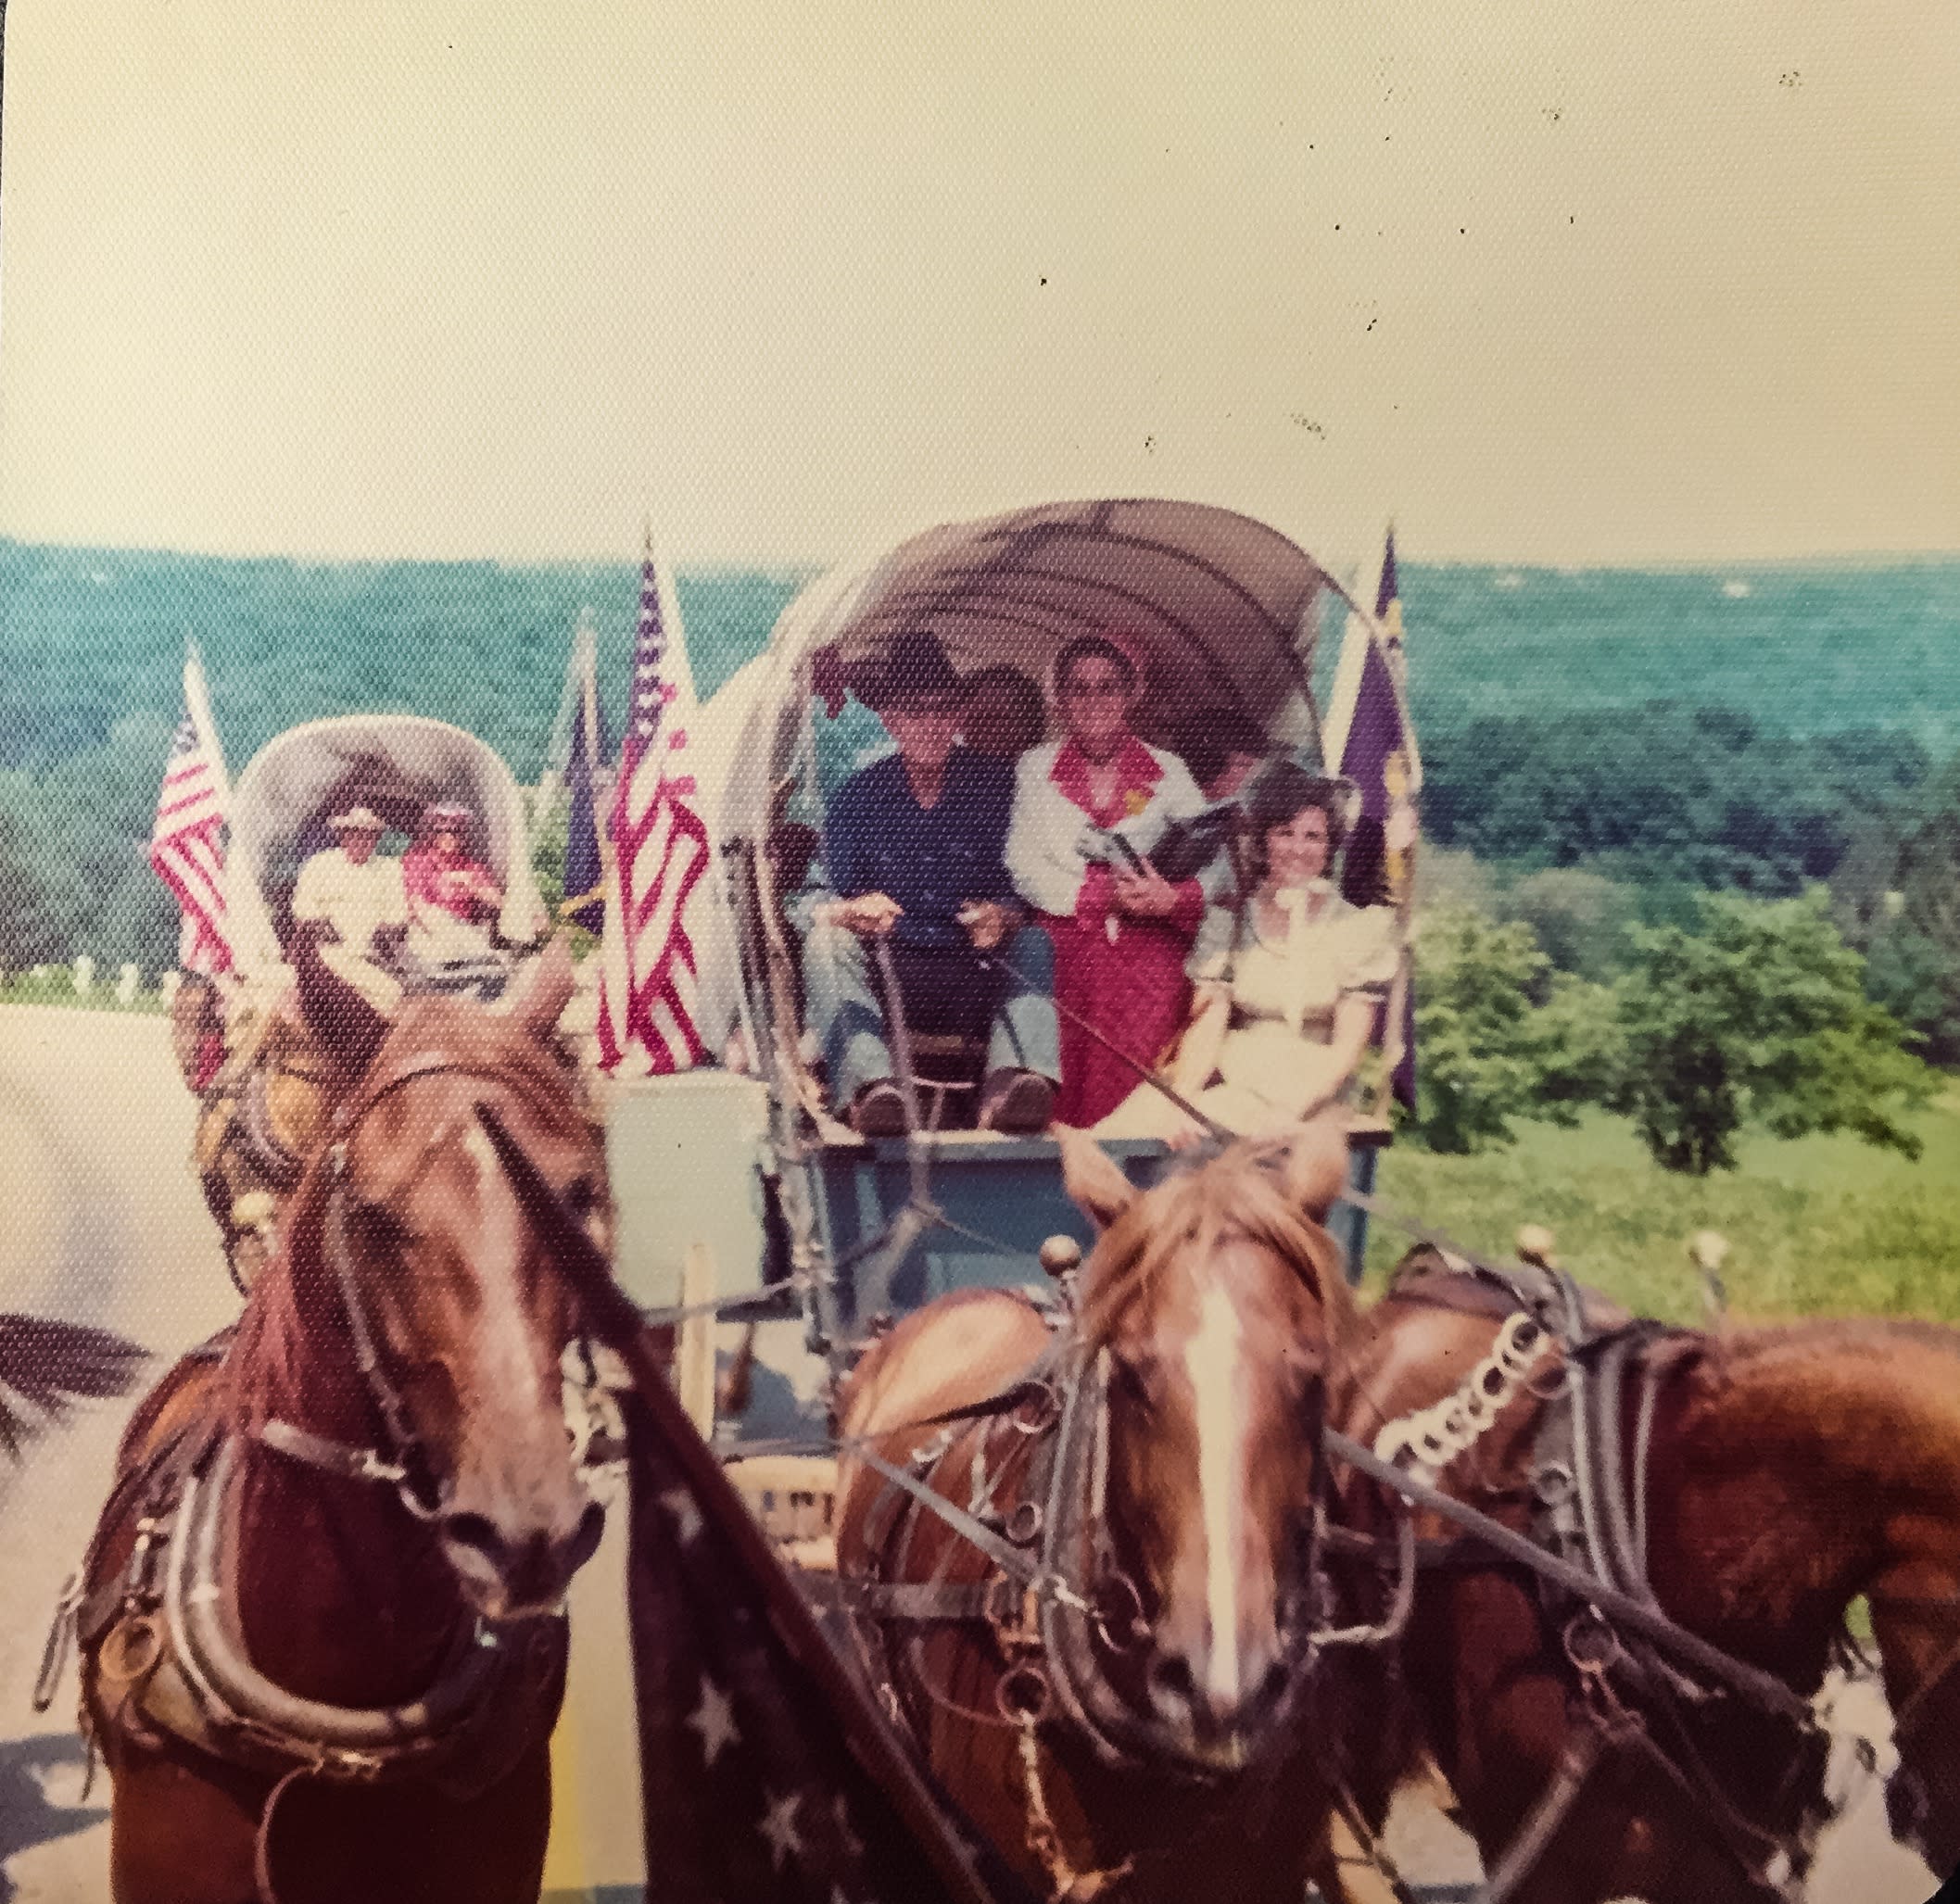 Celebrating ~and Making~ History in a Bicentennial Wagon | July 3, 1976